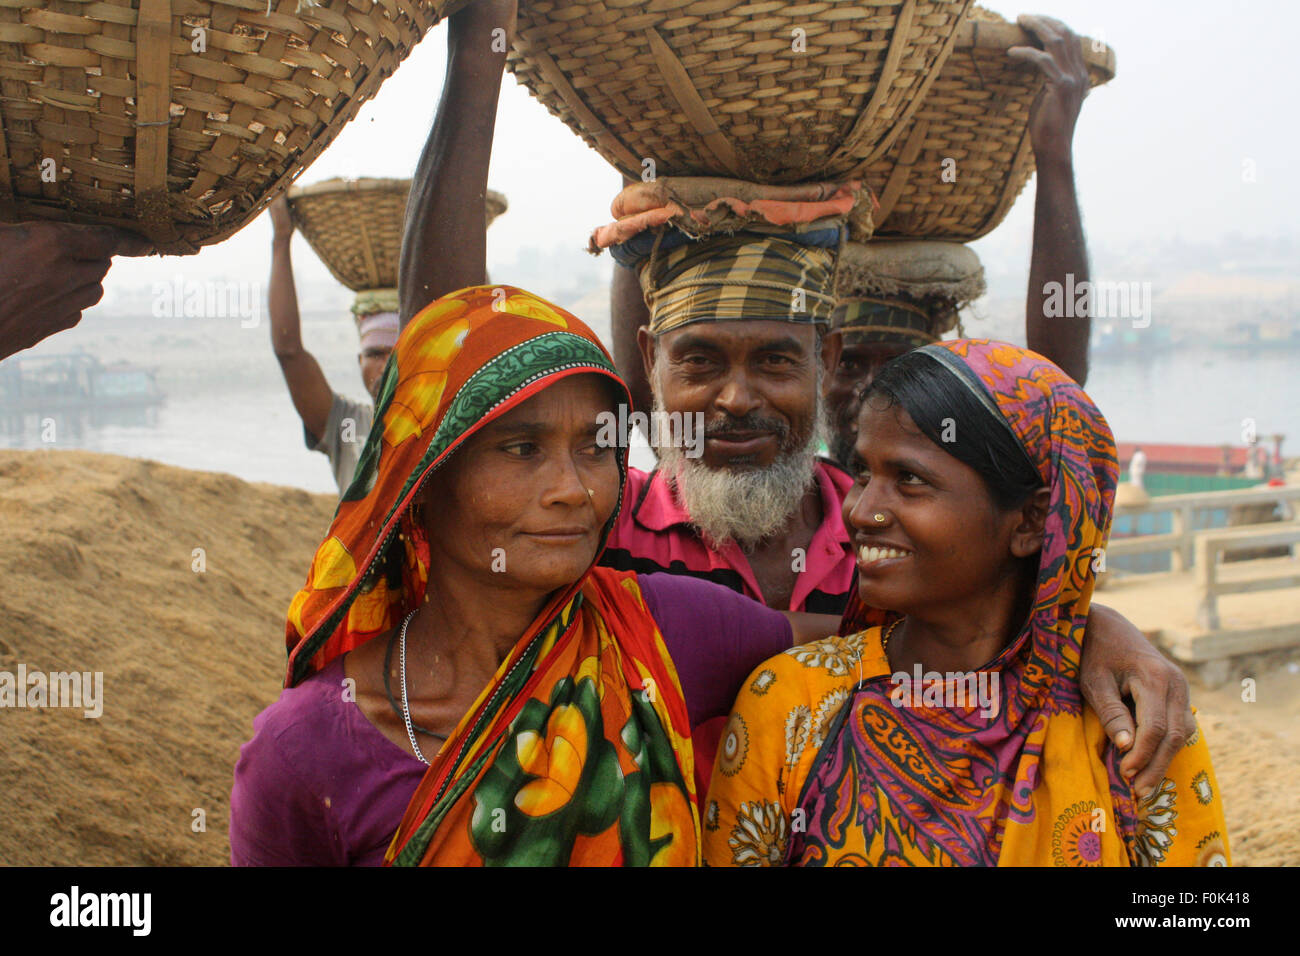 Portrait of woman Labor in Bangladesh. They are carries heavy loads of sand balanced on their heads in the Bank of Turag River. Stock Photo